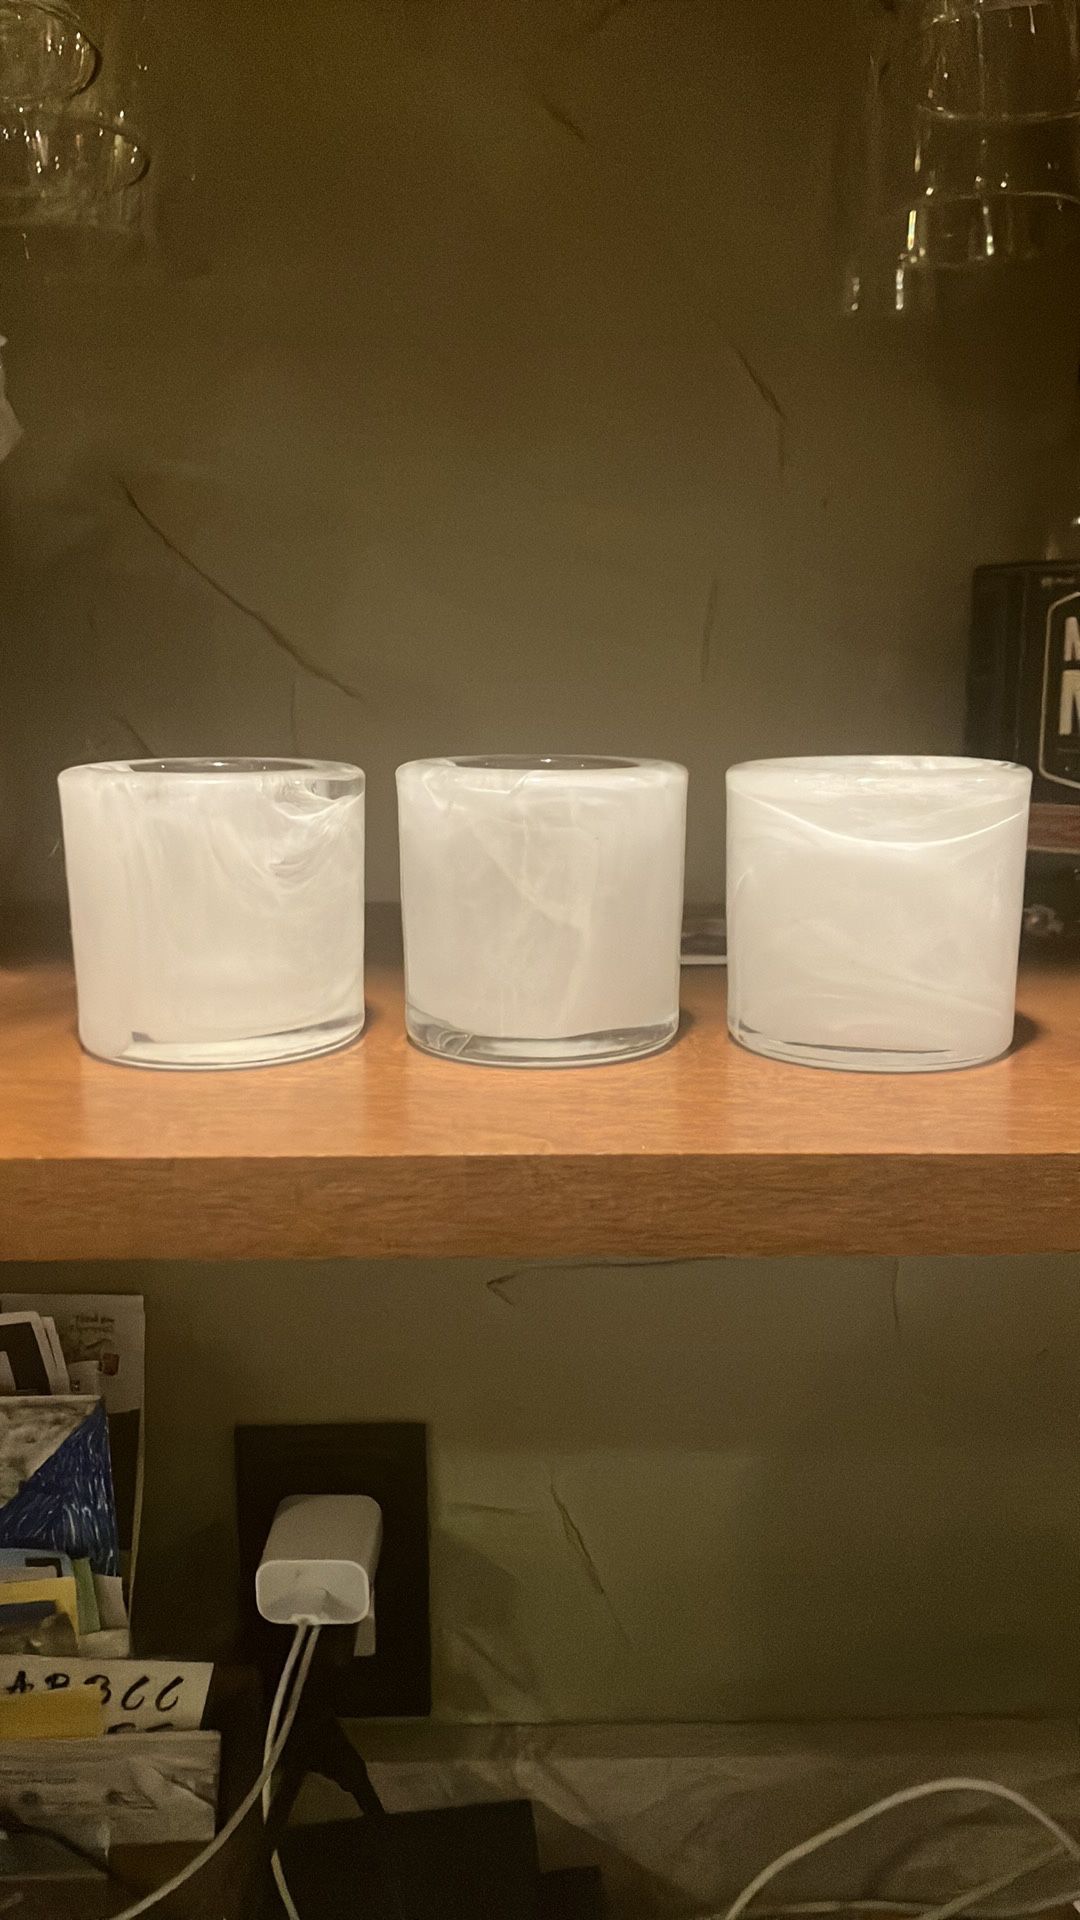 Candle Holders From Target